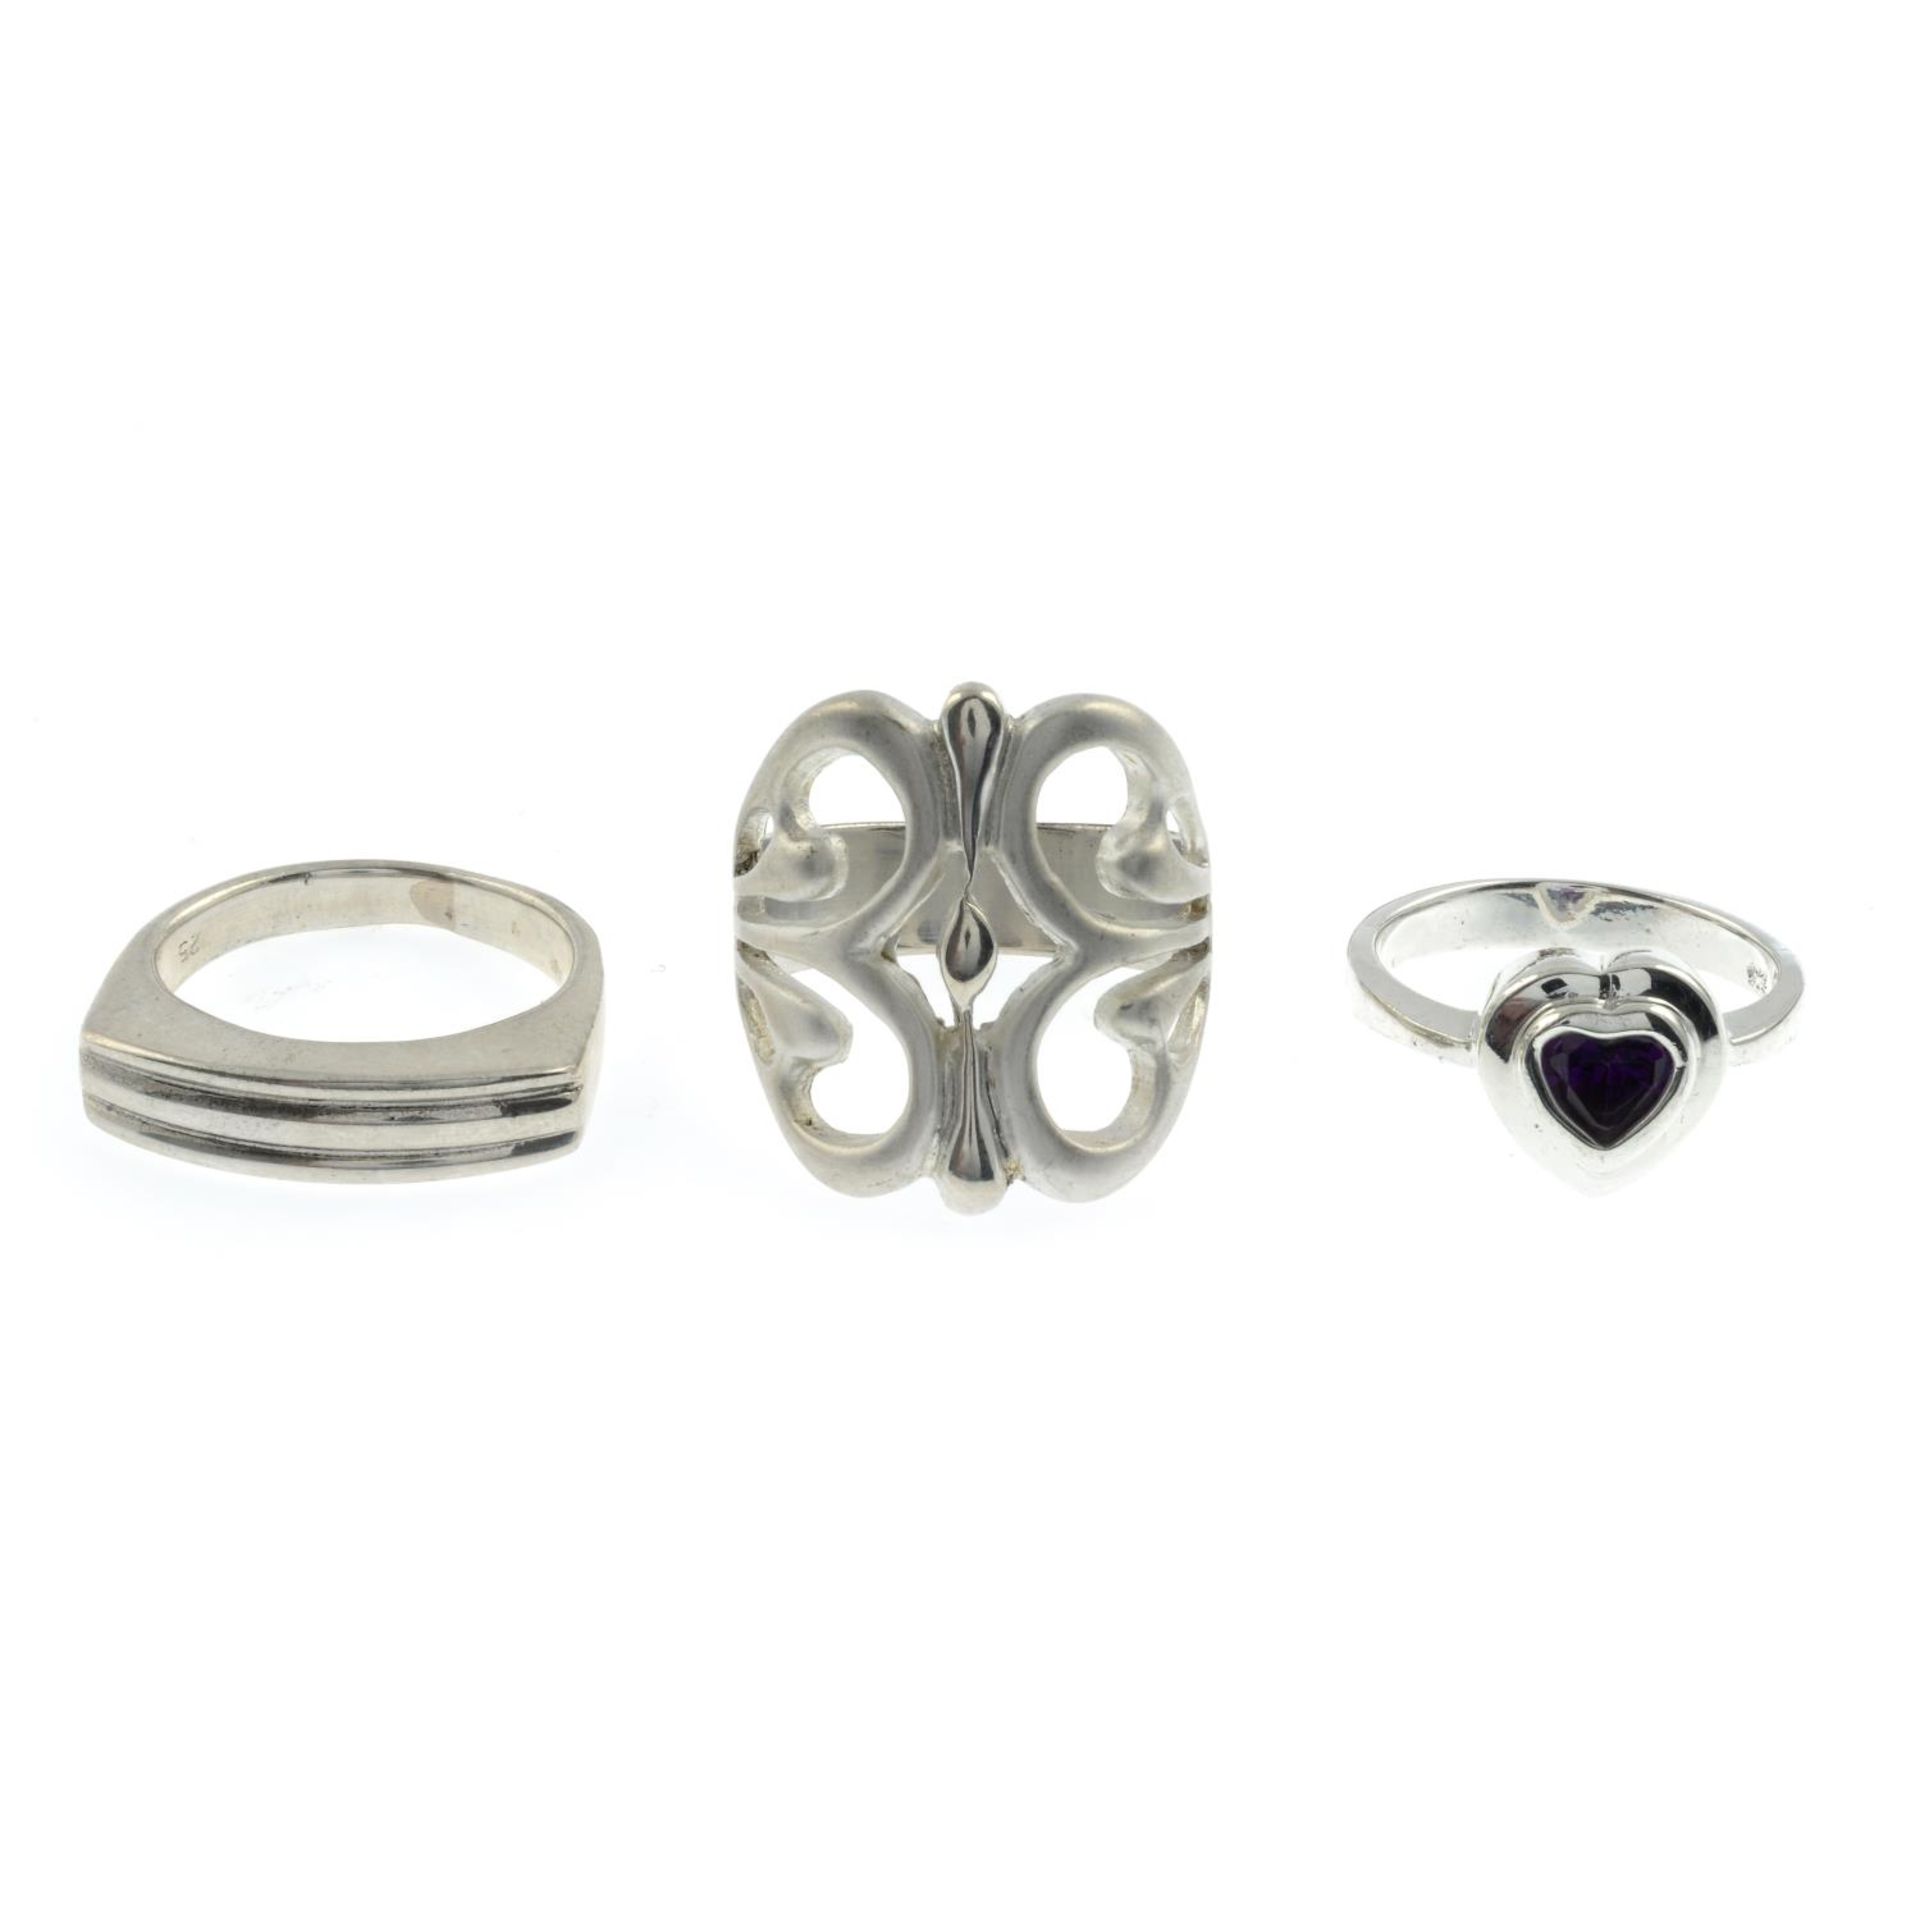 A selection of enamel and gem-set rings.